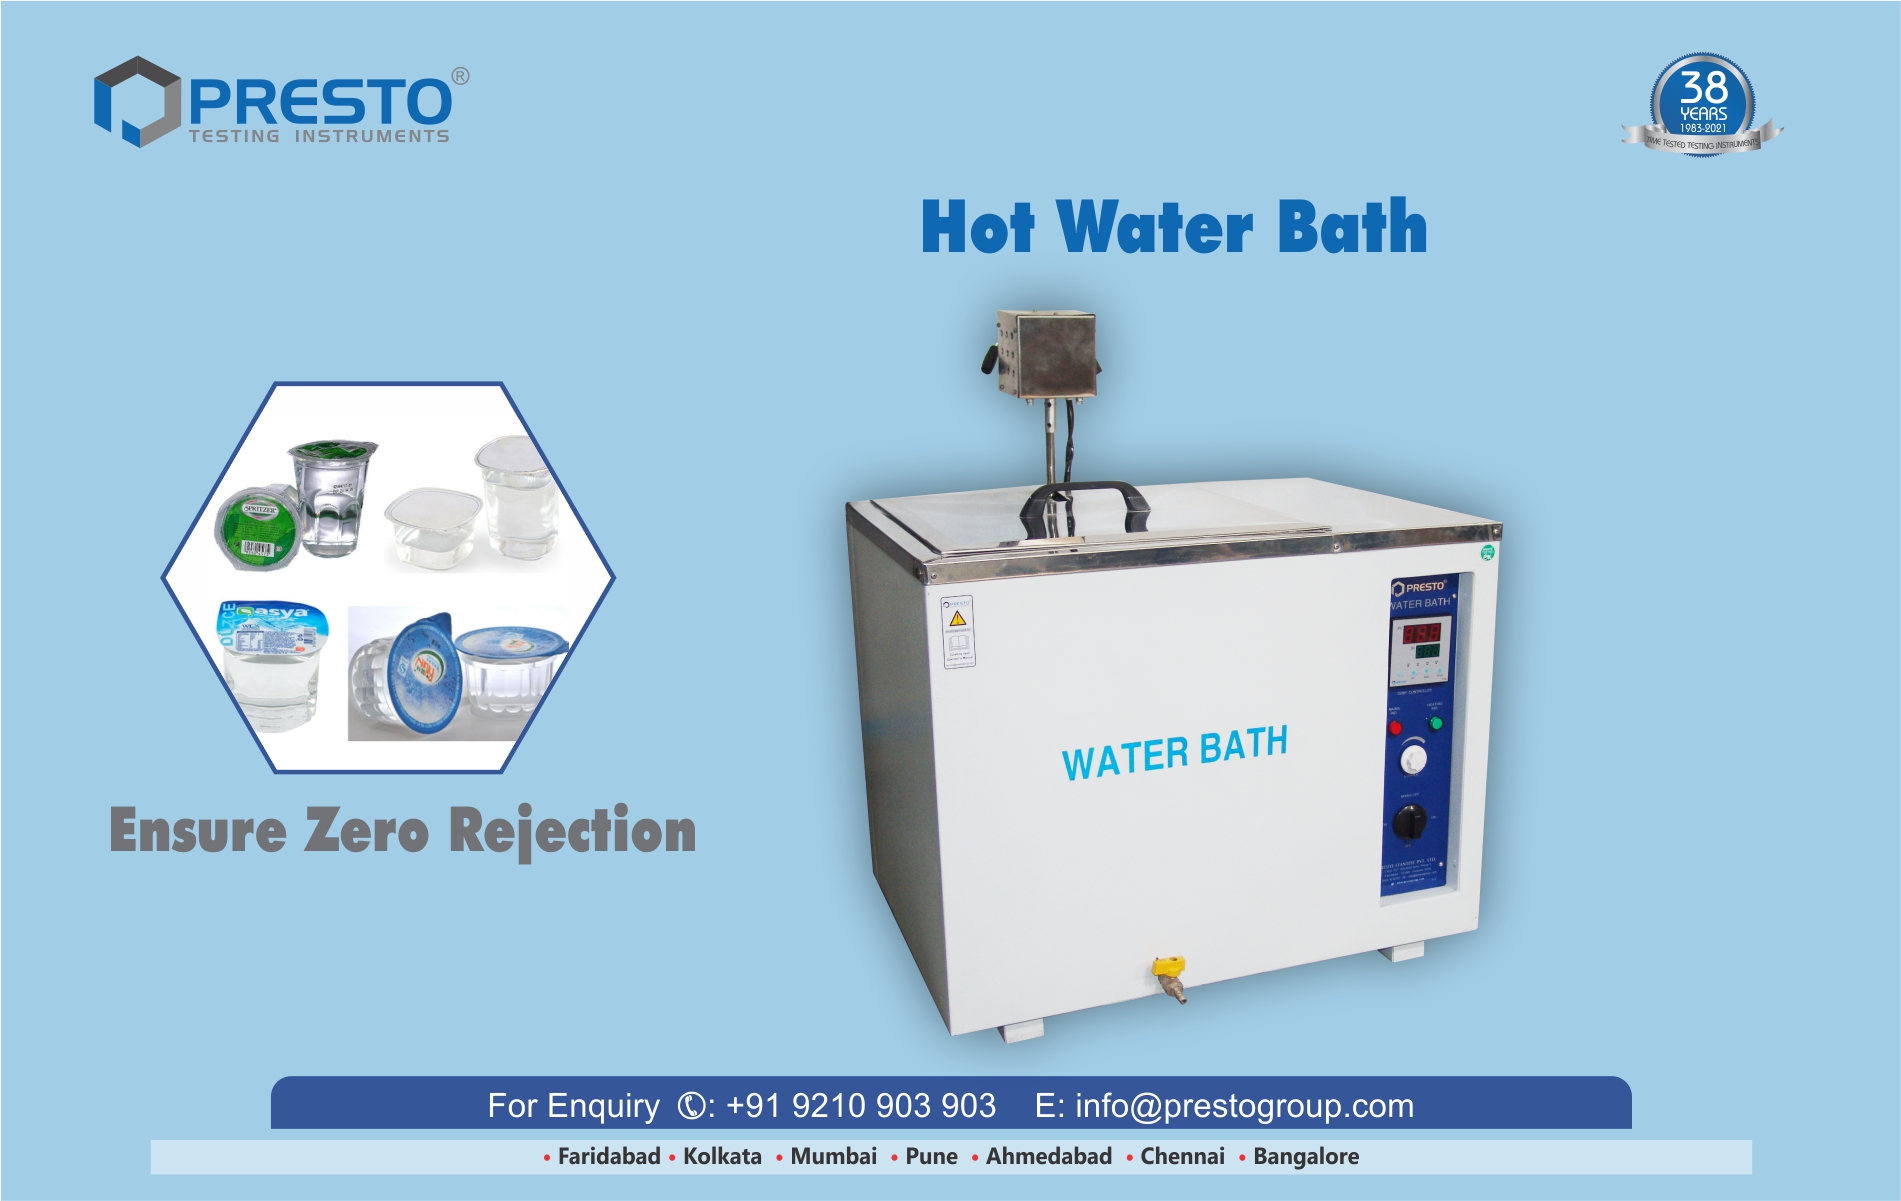 Hot Water Bath - Digital with an Automated Solution Instigator